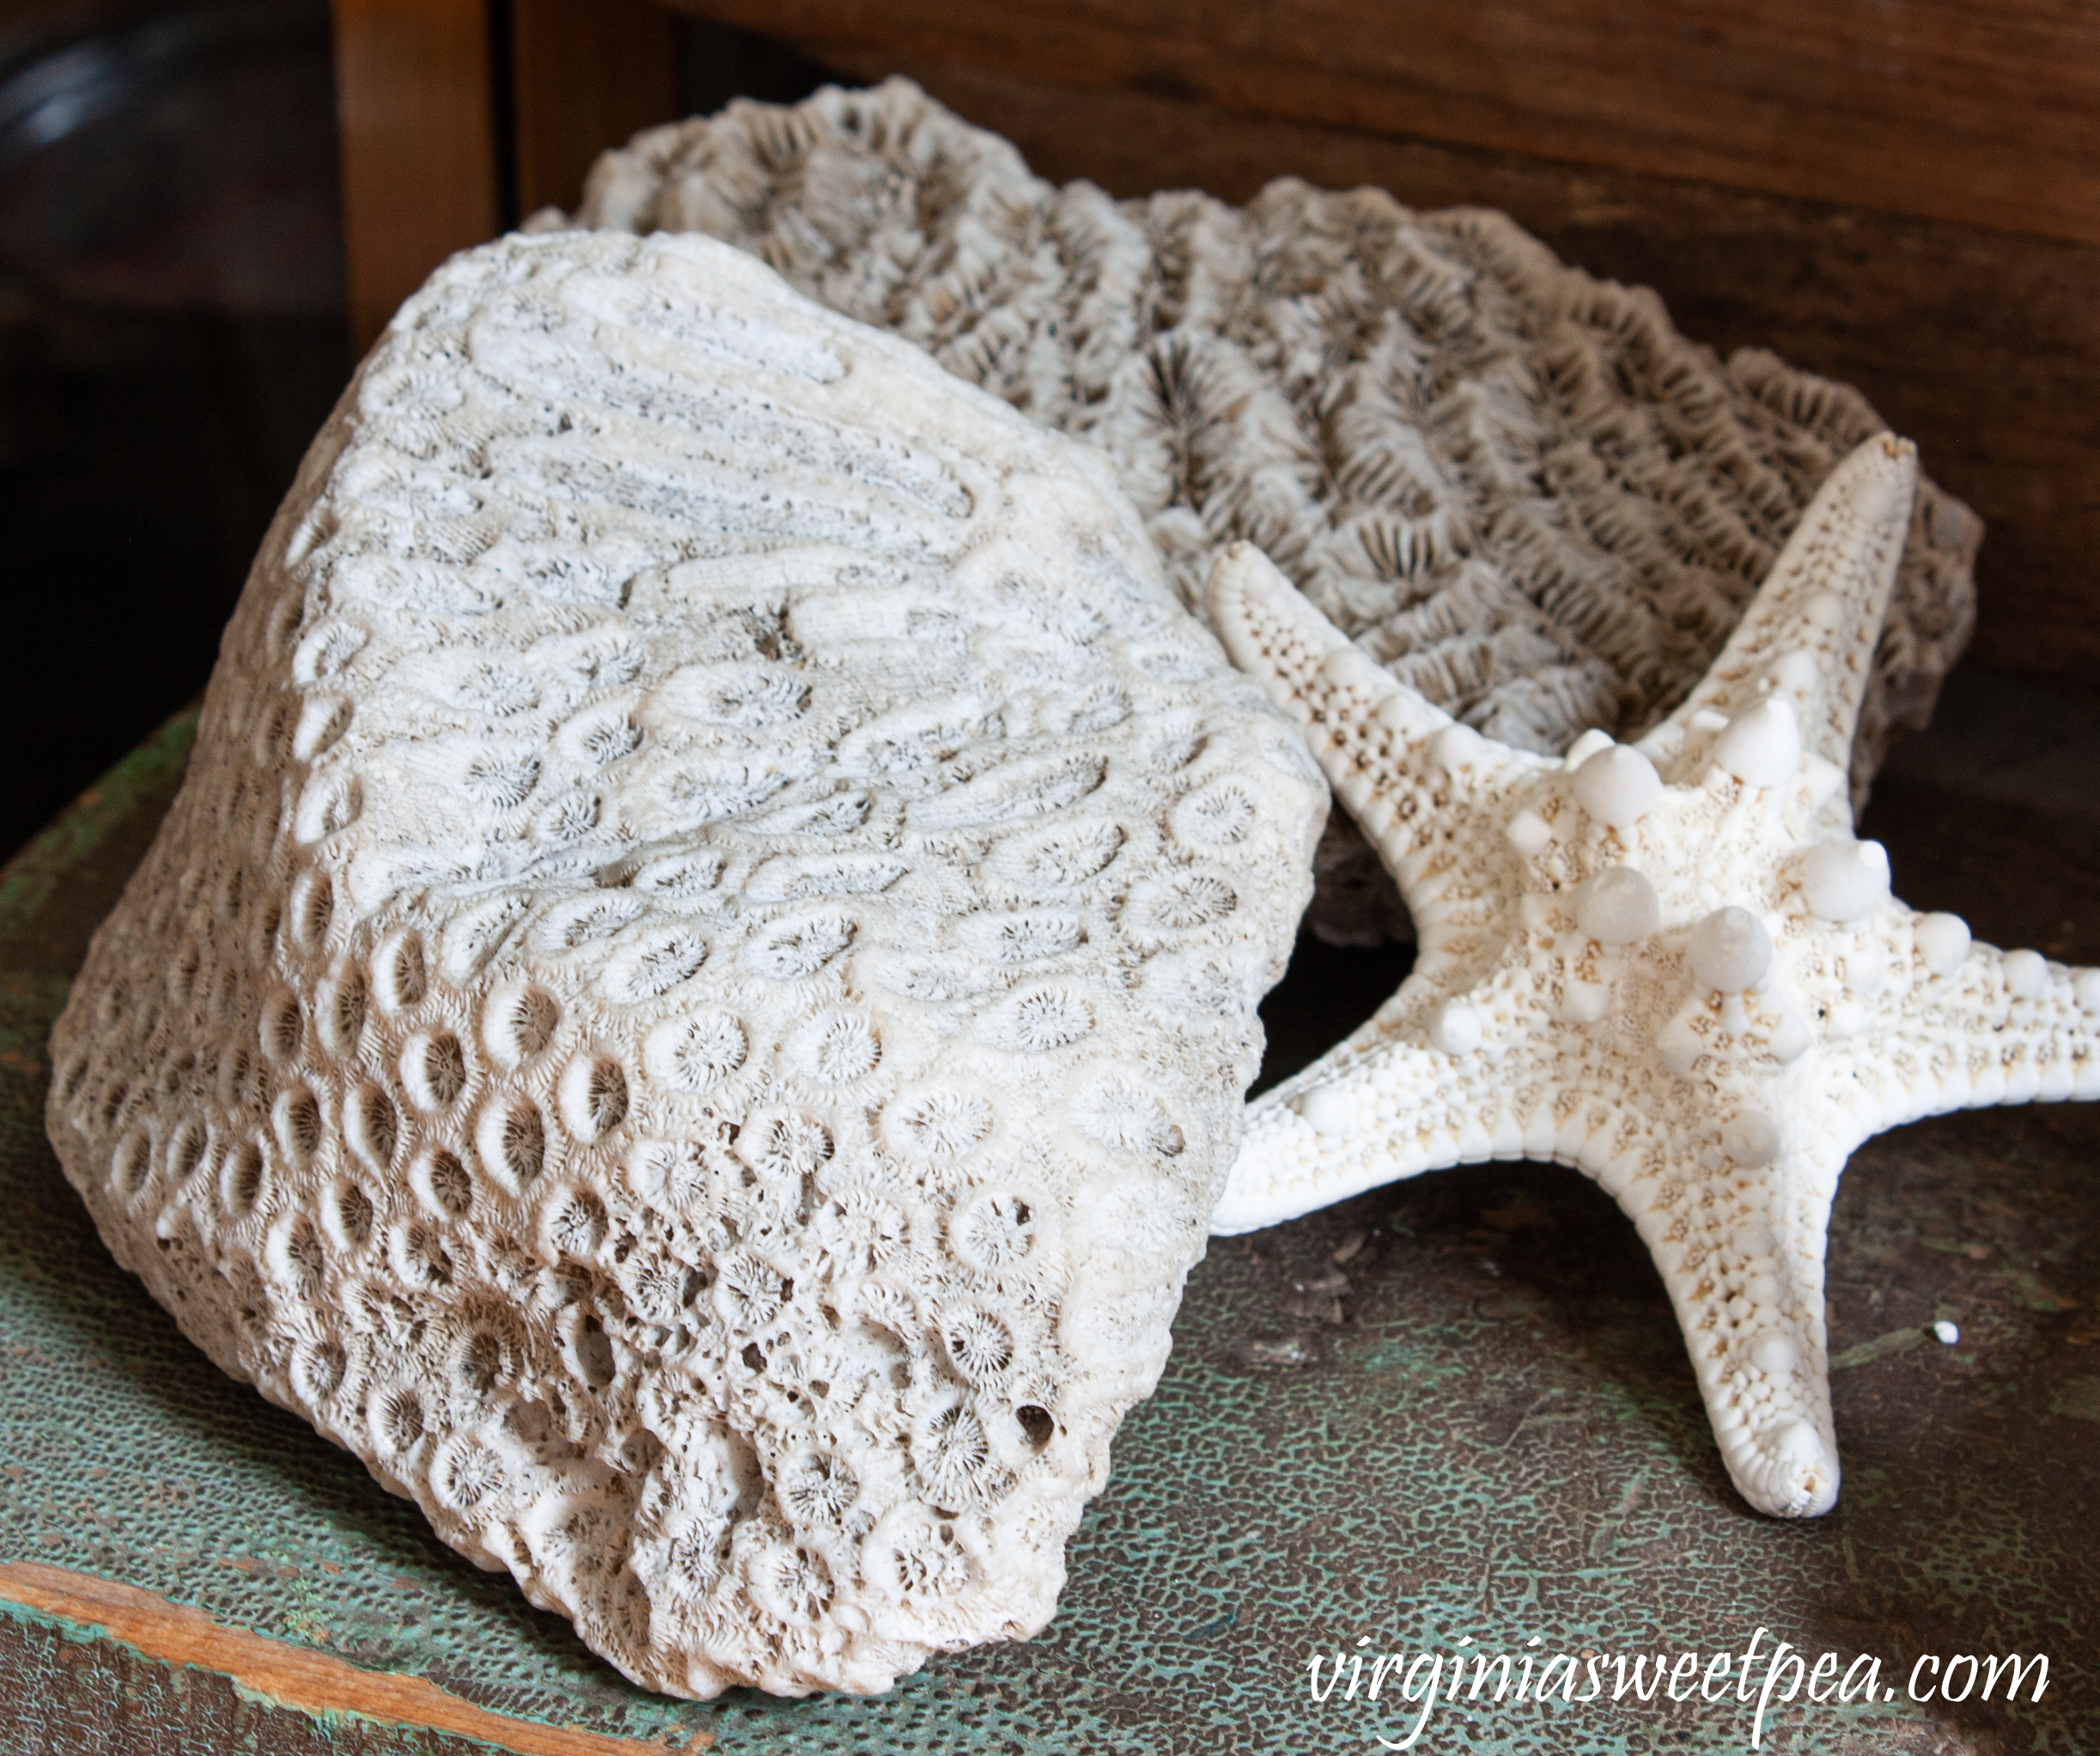 Coral and a Starfish used in a summer coastal themed vignette